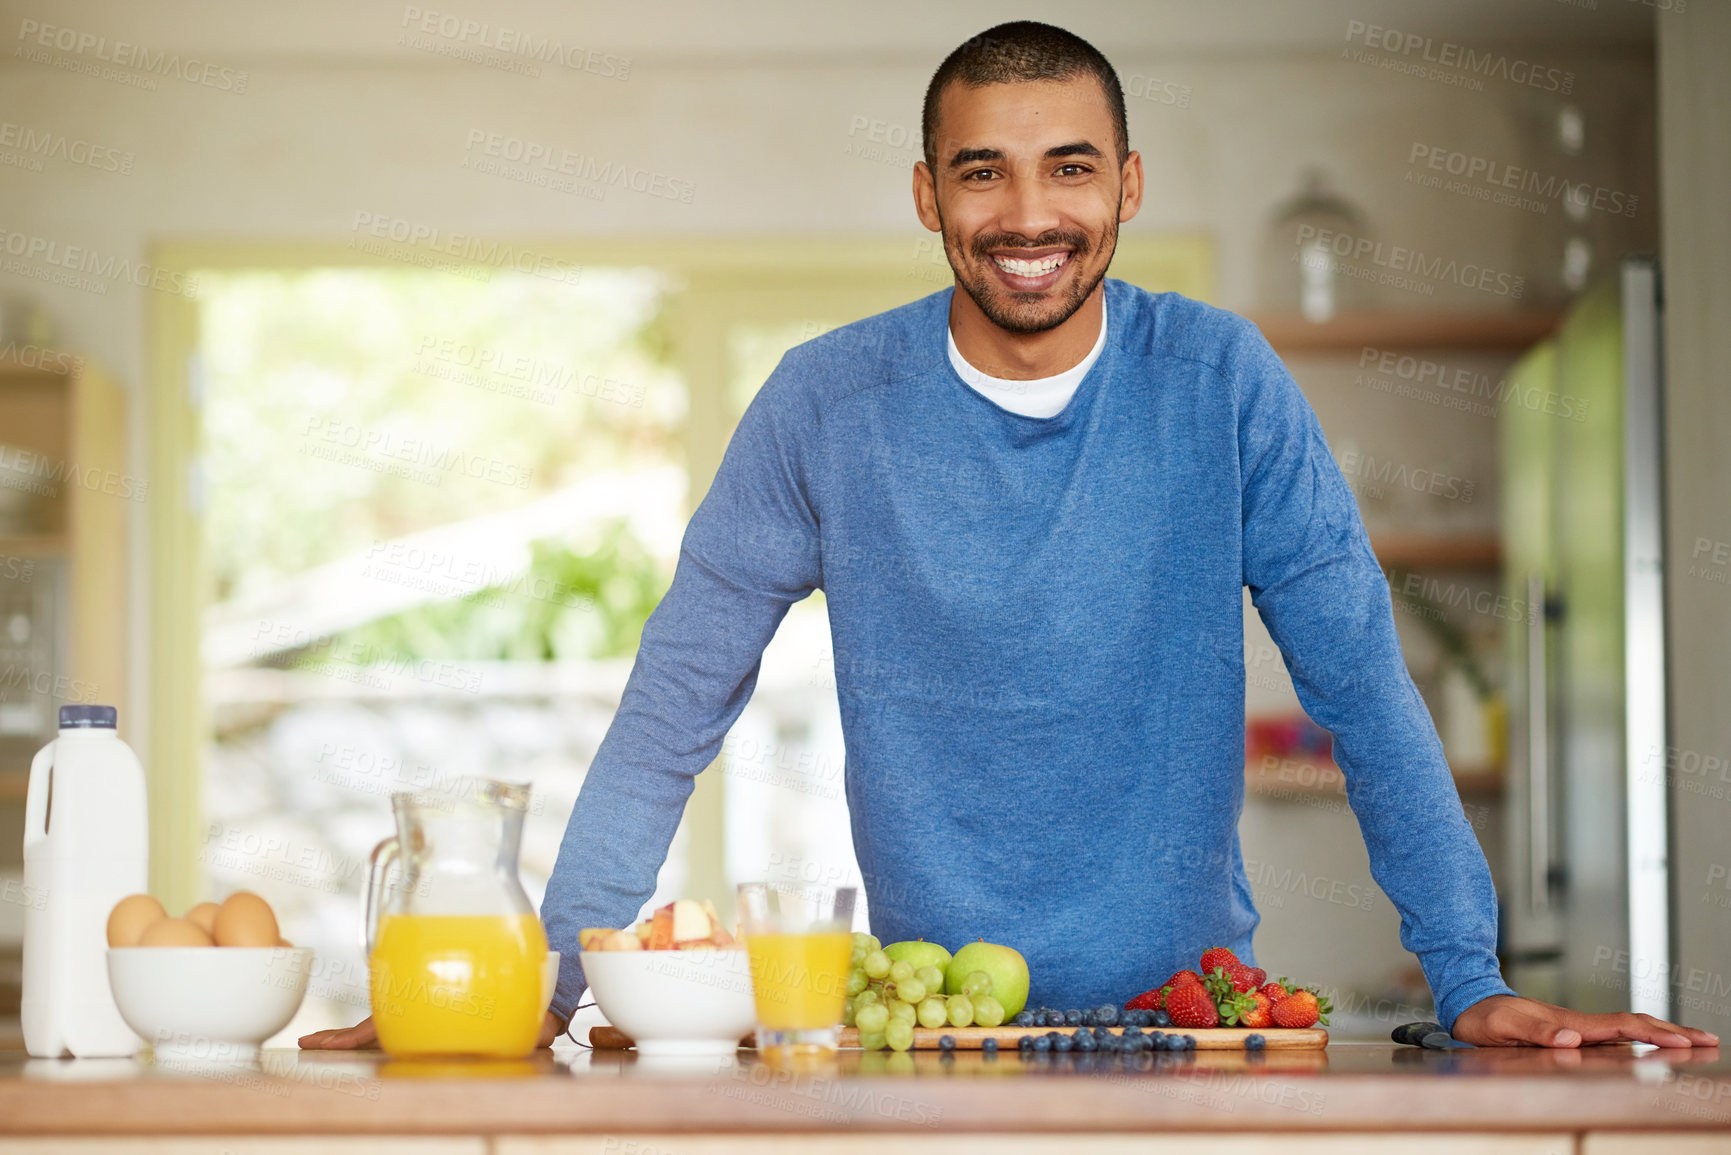 Buy stock photo Portrait of a happy young man preparing a healthy snack at home